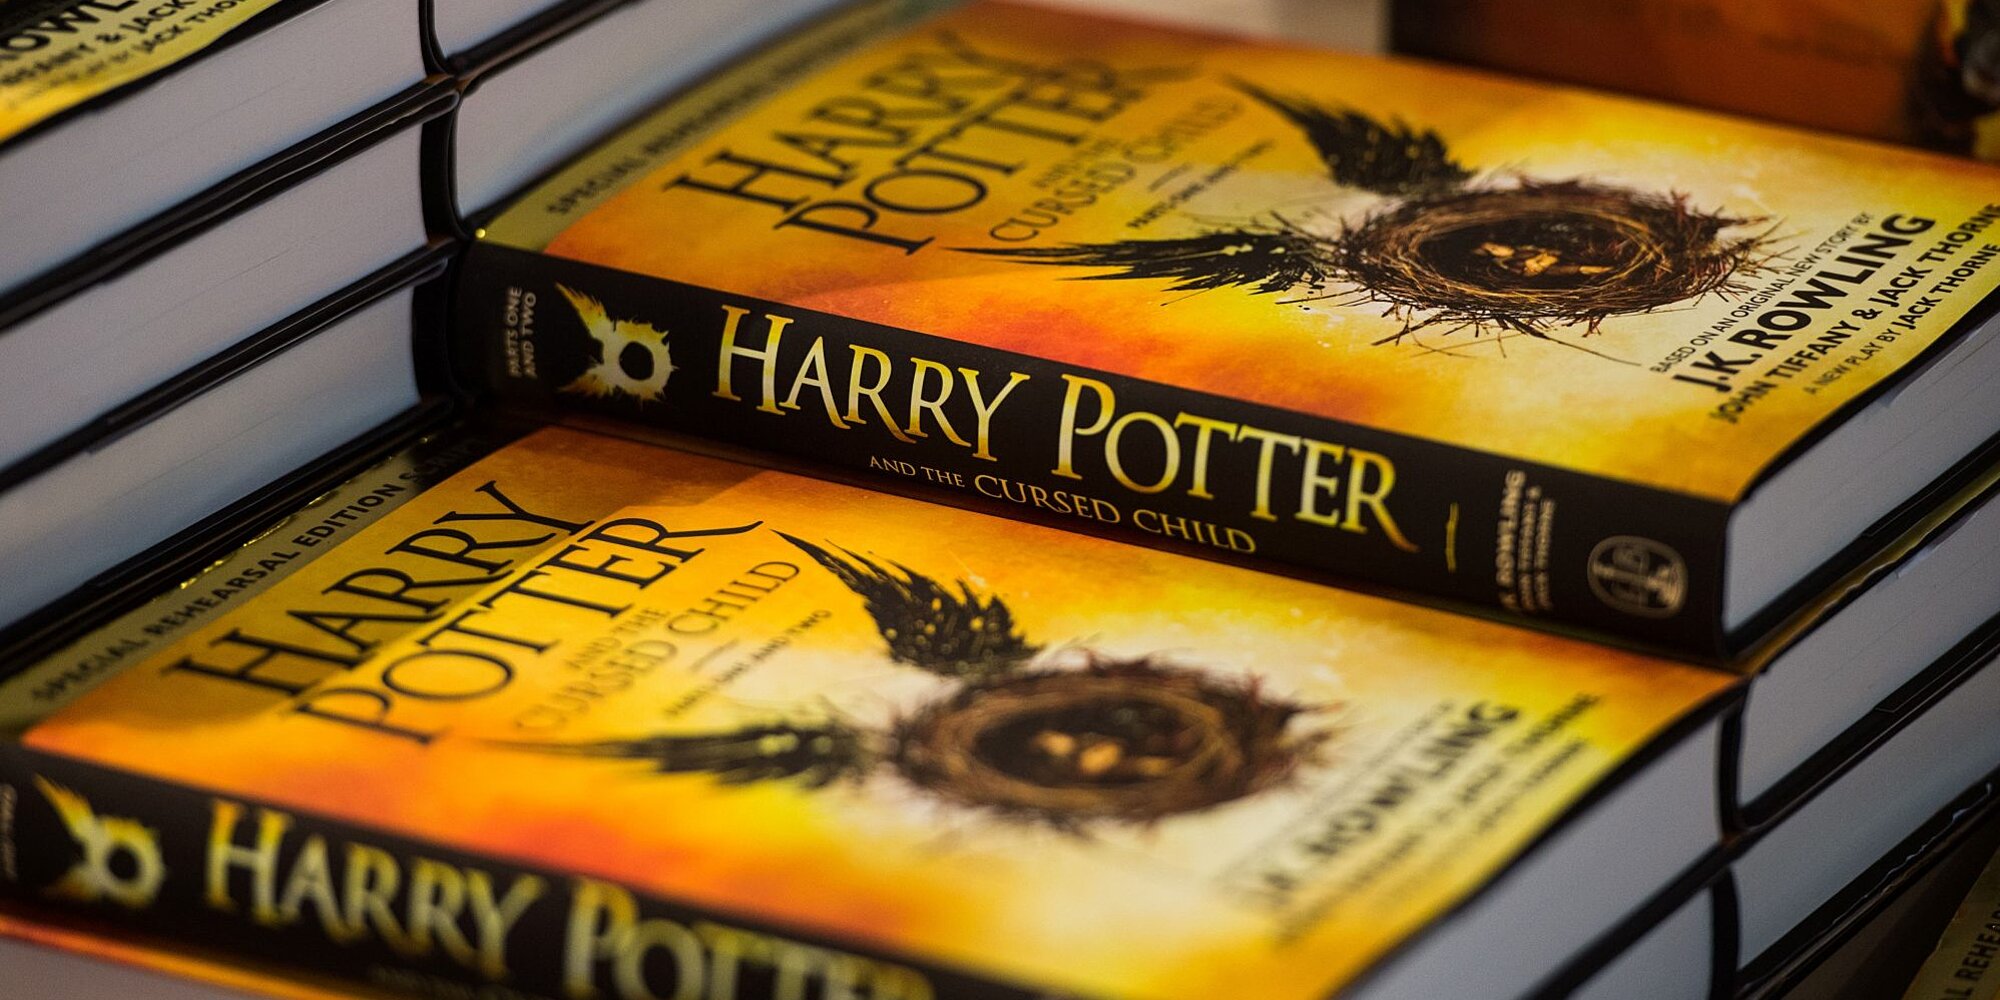 harry potter and the cursed child book come out